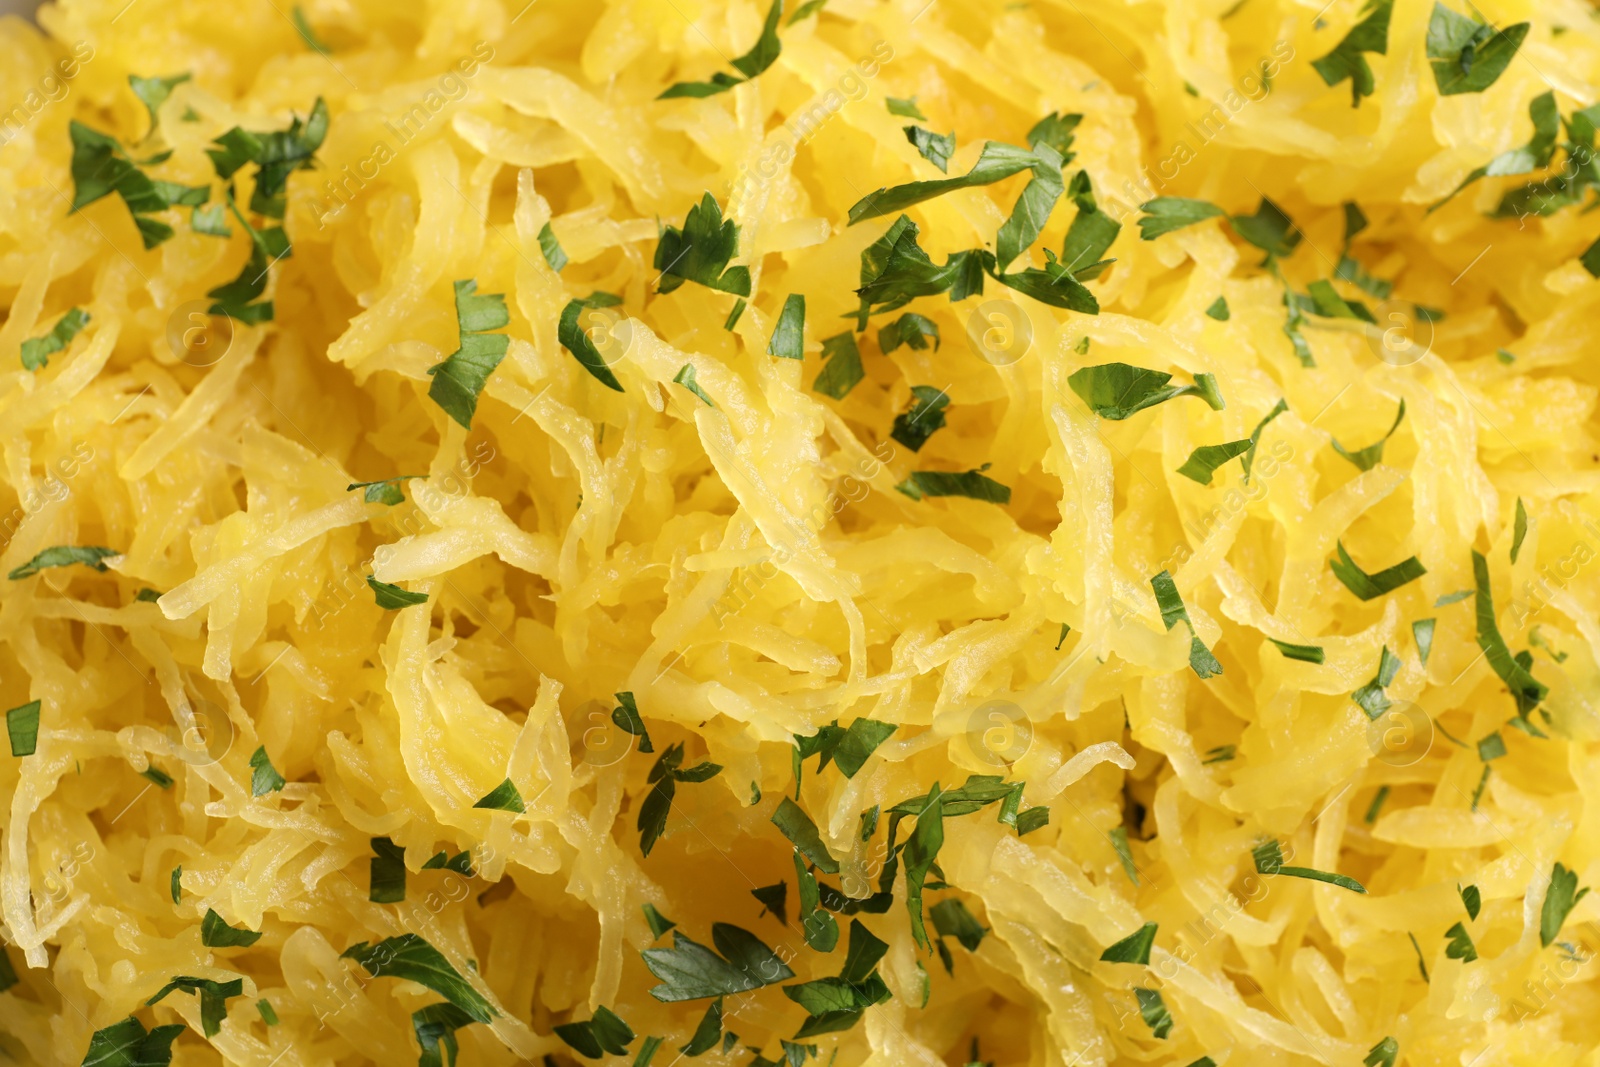 Photo of Cooked spaghetti squash with parsley as background, top view